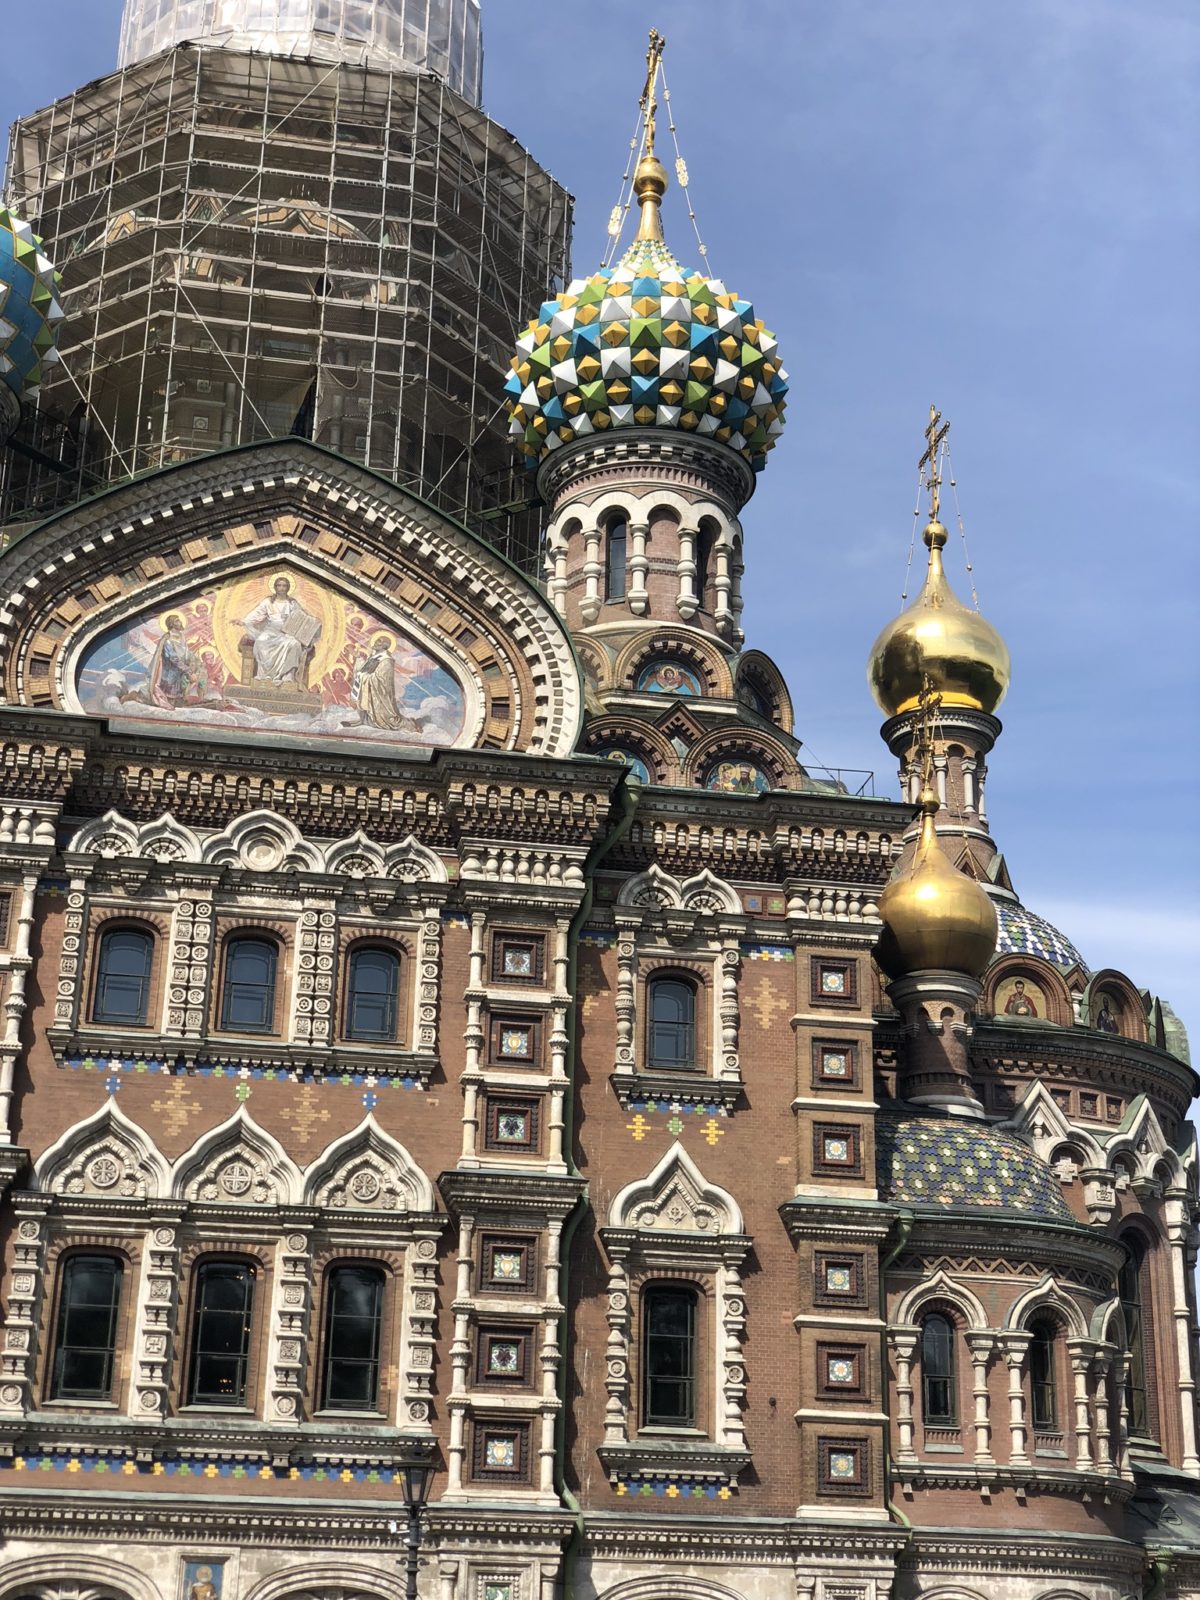 St. Petersburg – Night One and Day One